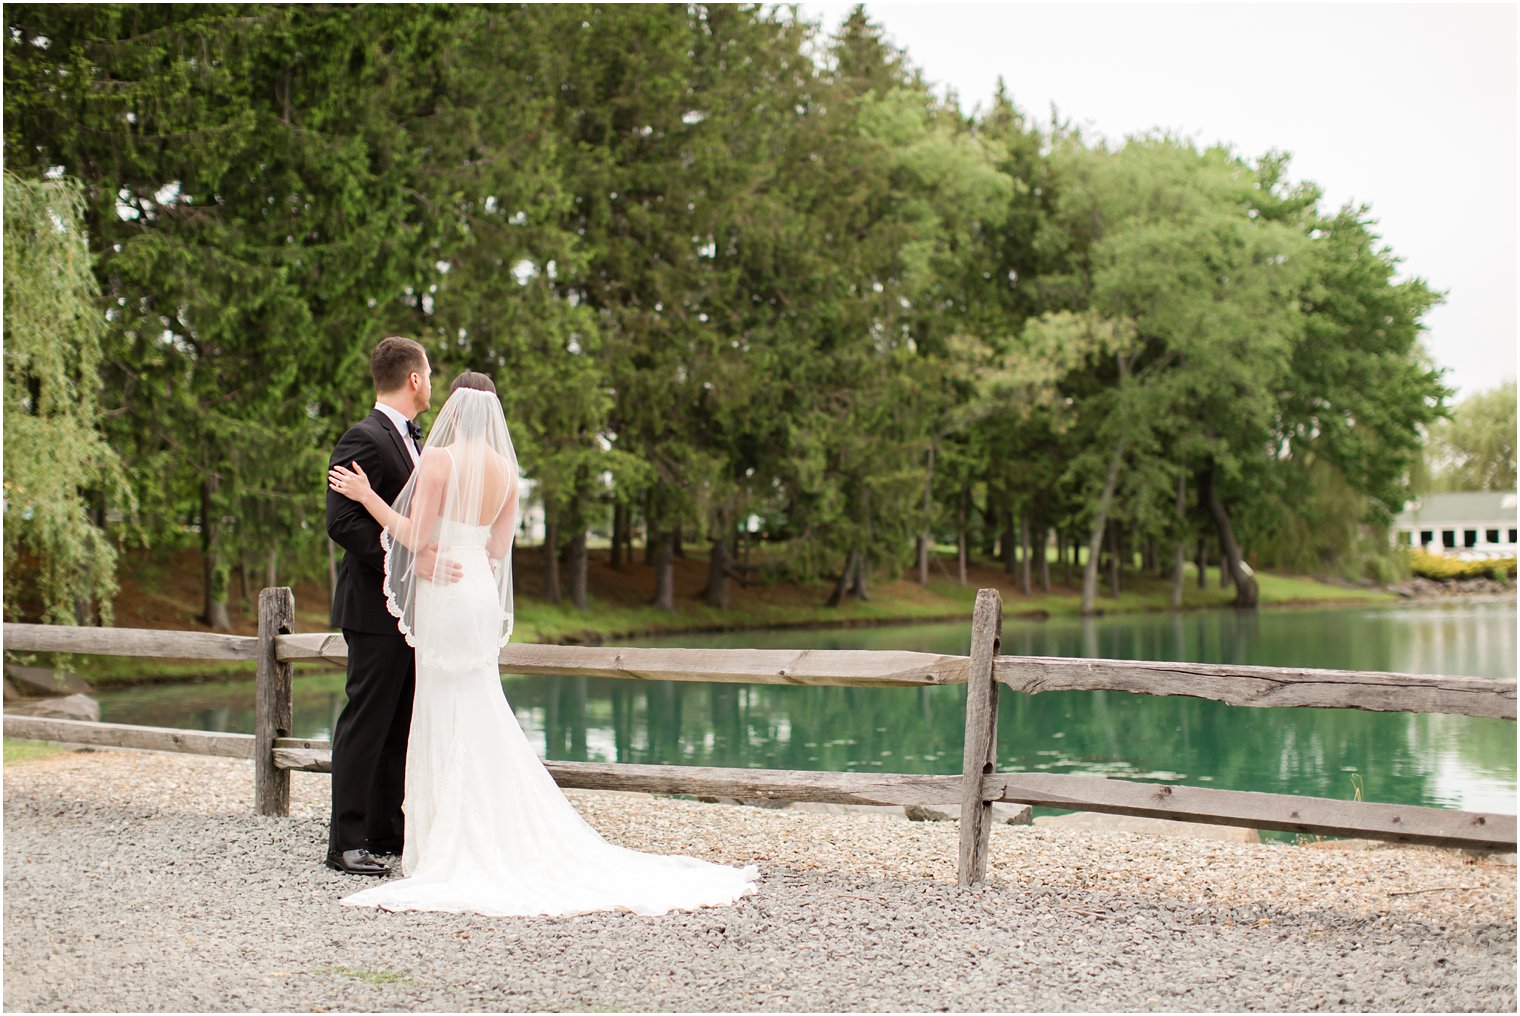 Romantic portraits at Windows on the Water at Frogbridge | Photos by Idalia Photography